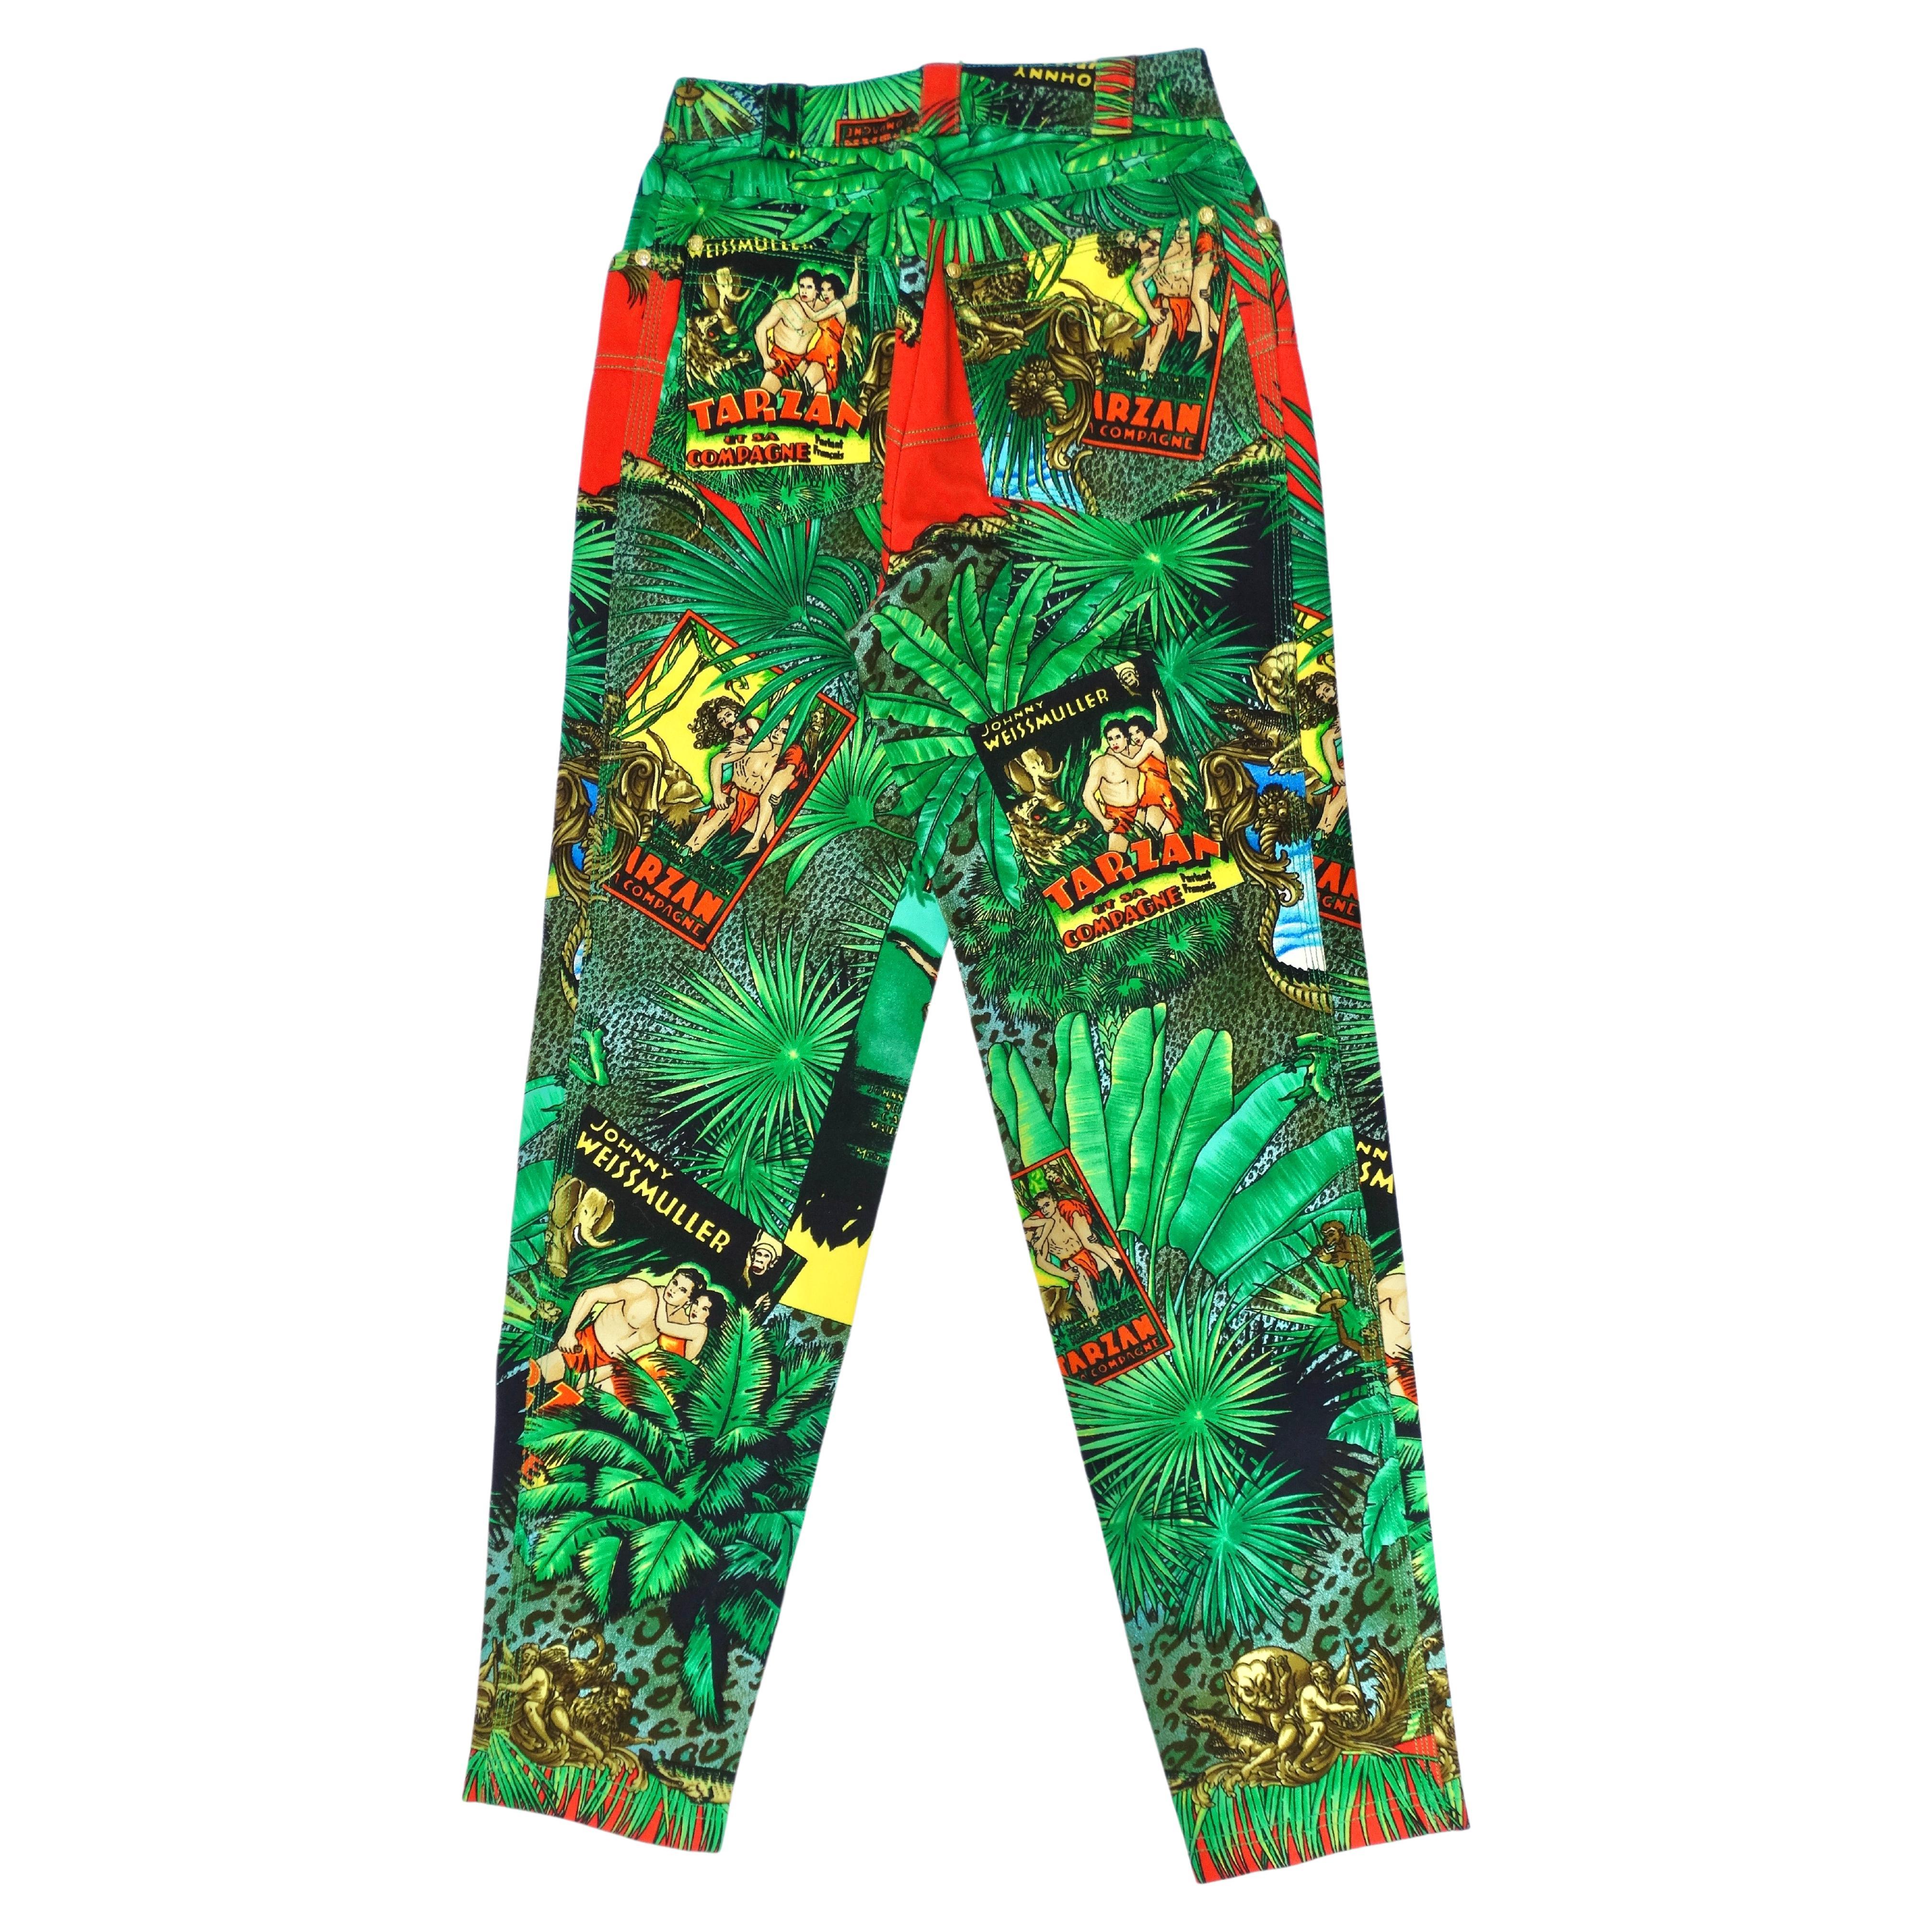 These 1990's Versace jeans are a super rare and collectible find!! Don't forget to have fun with fashion. These tarzan-printed jeans are by Versace Jeans Couture and feature stretch cotton fabric, classic 5-pocket style, high-rise, and a button and